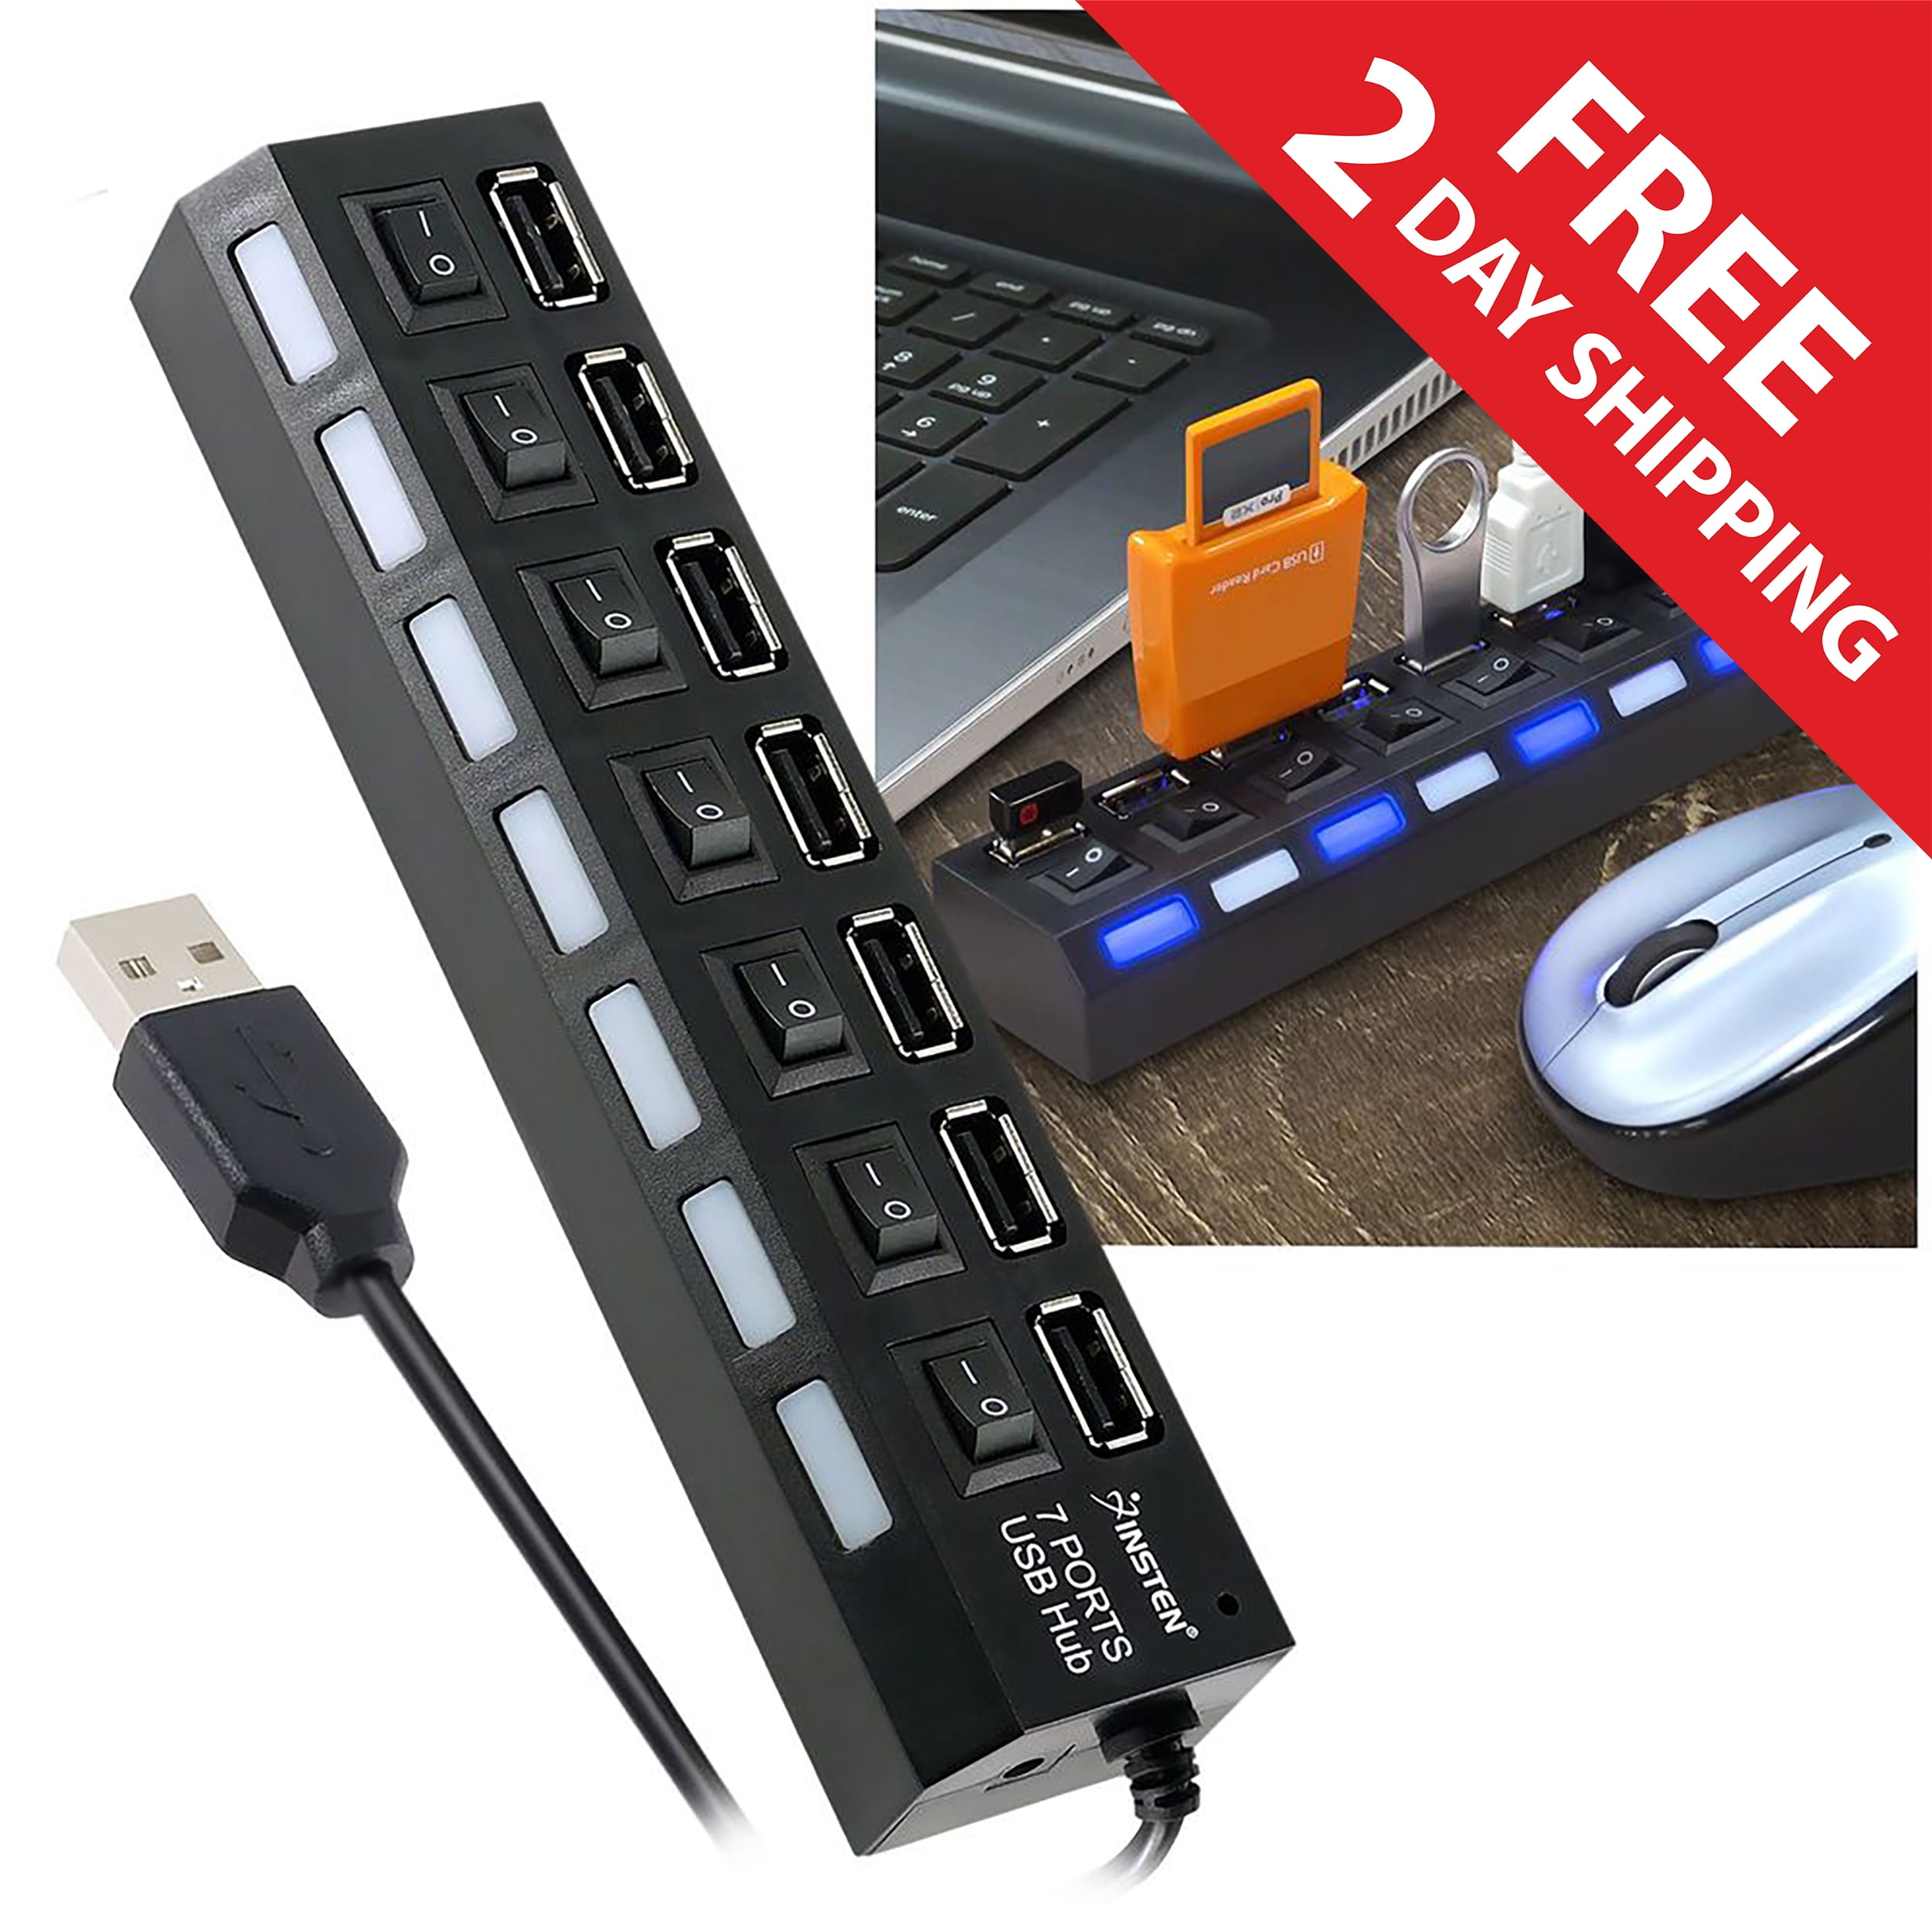 7 Port USB Hub for Laptop Computer Adapter, 2.0 Charger Splitter with On Off Switches for Windows PC Smartphone Charging Data Transfer - Walmart.com